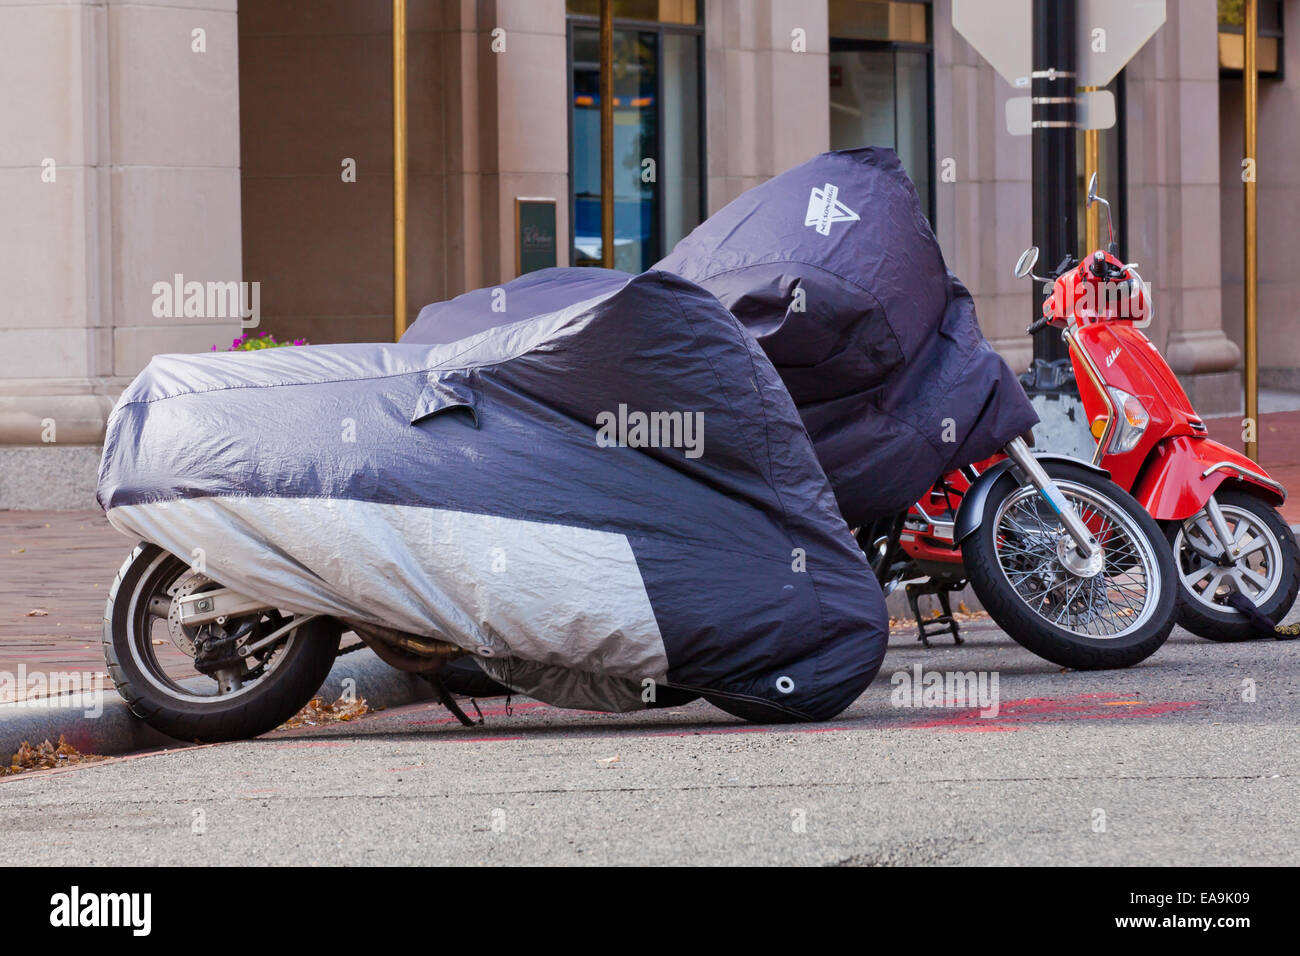 Motorcycle covers - USA Stock Photo